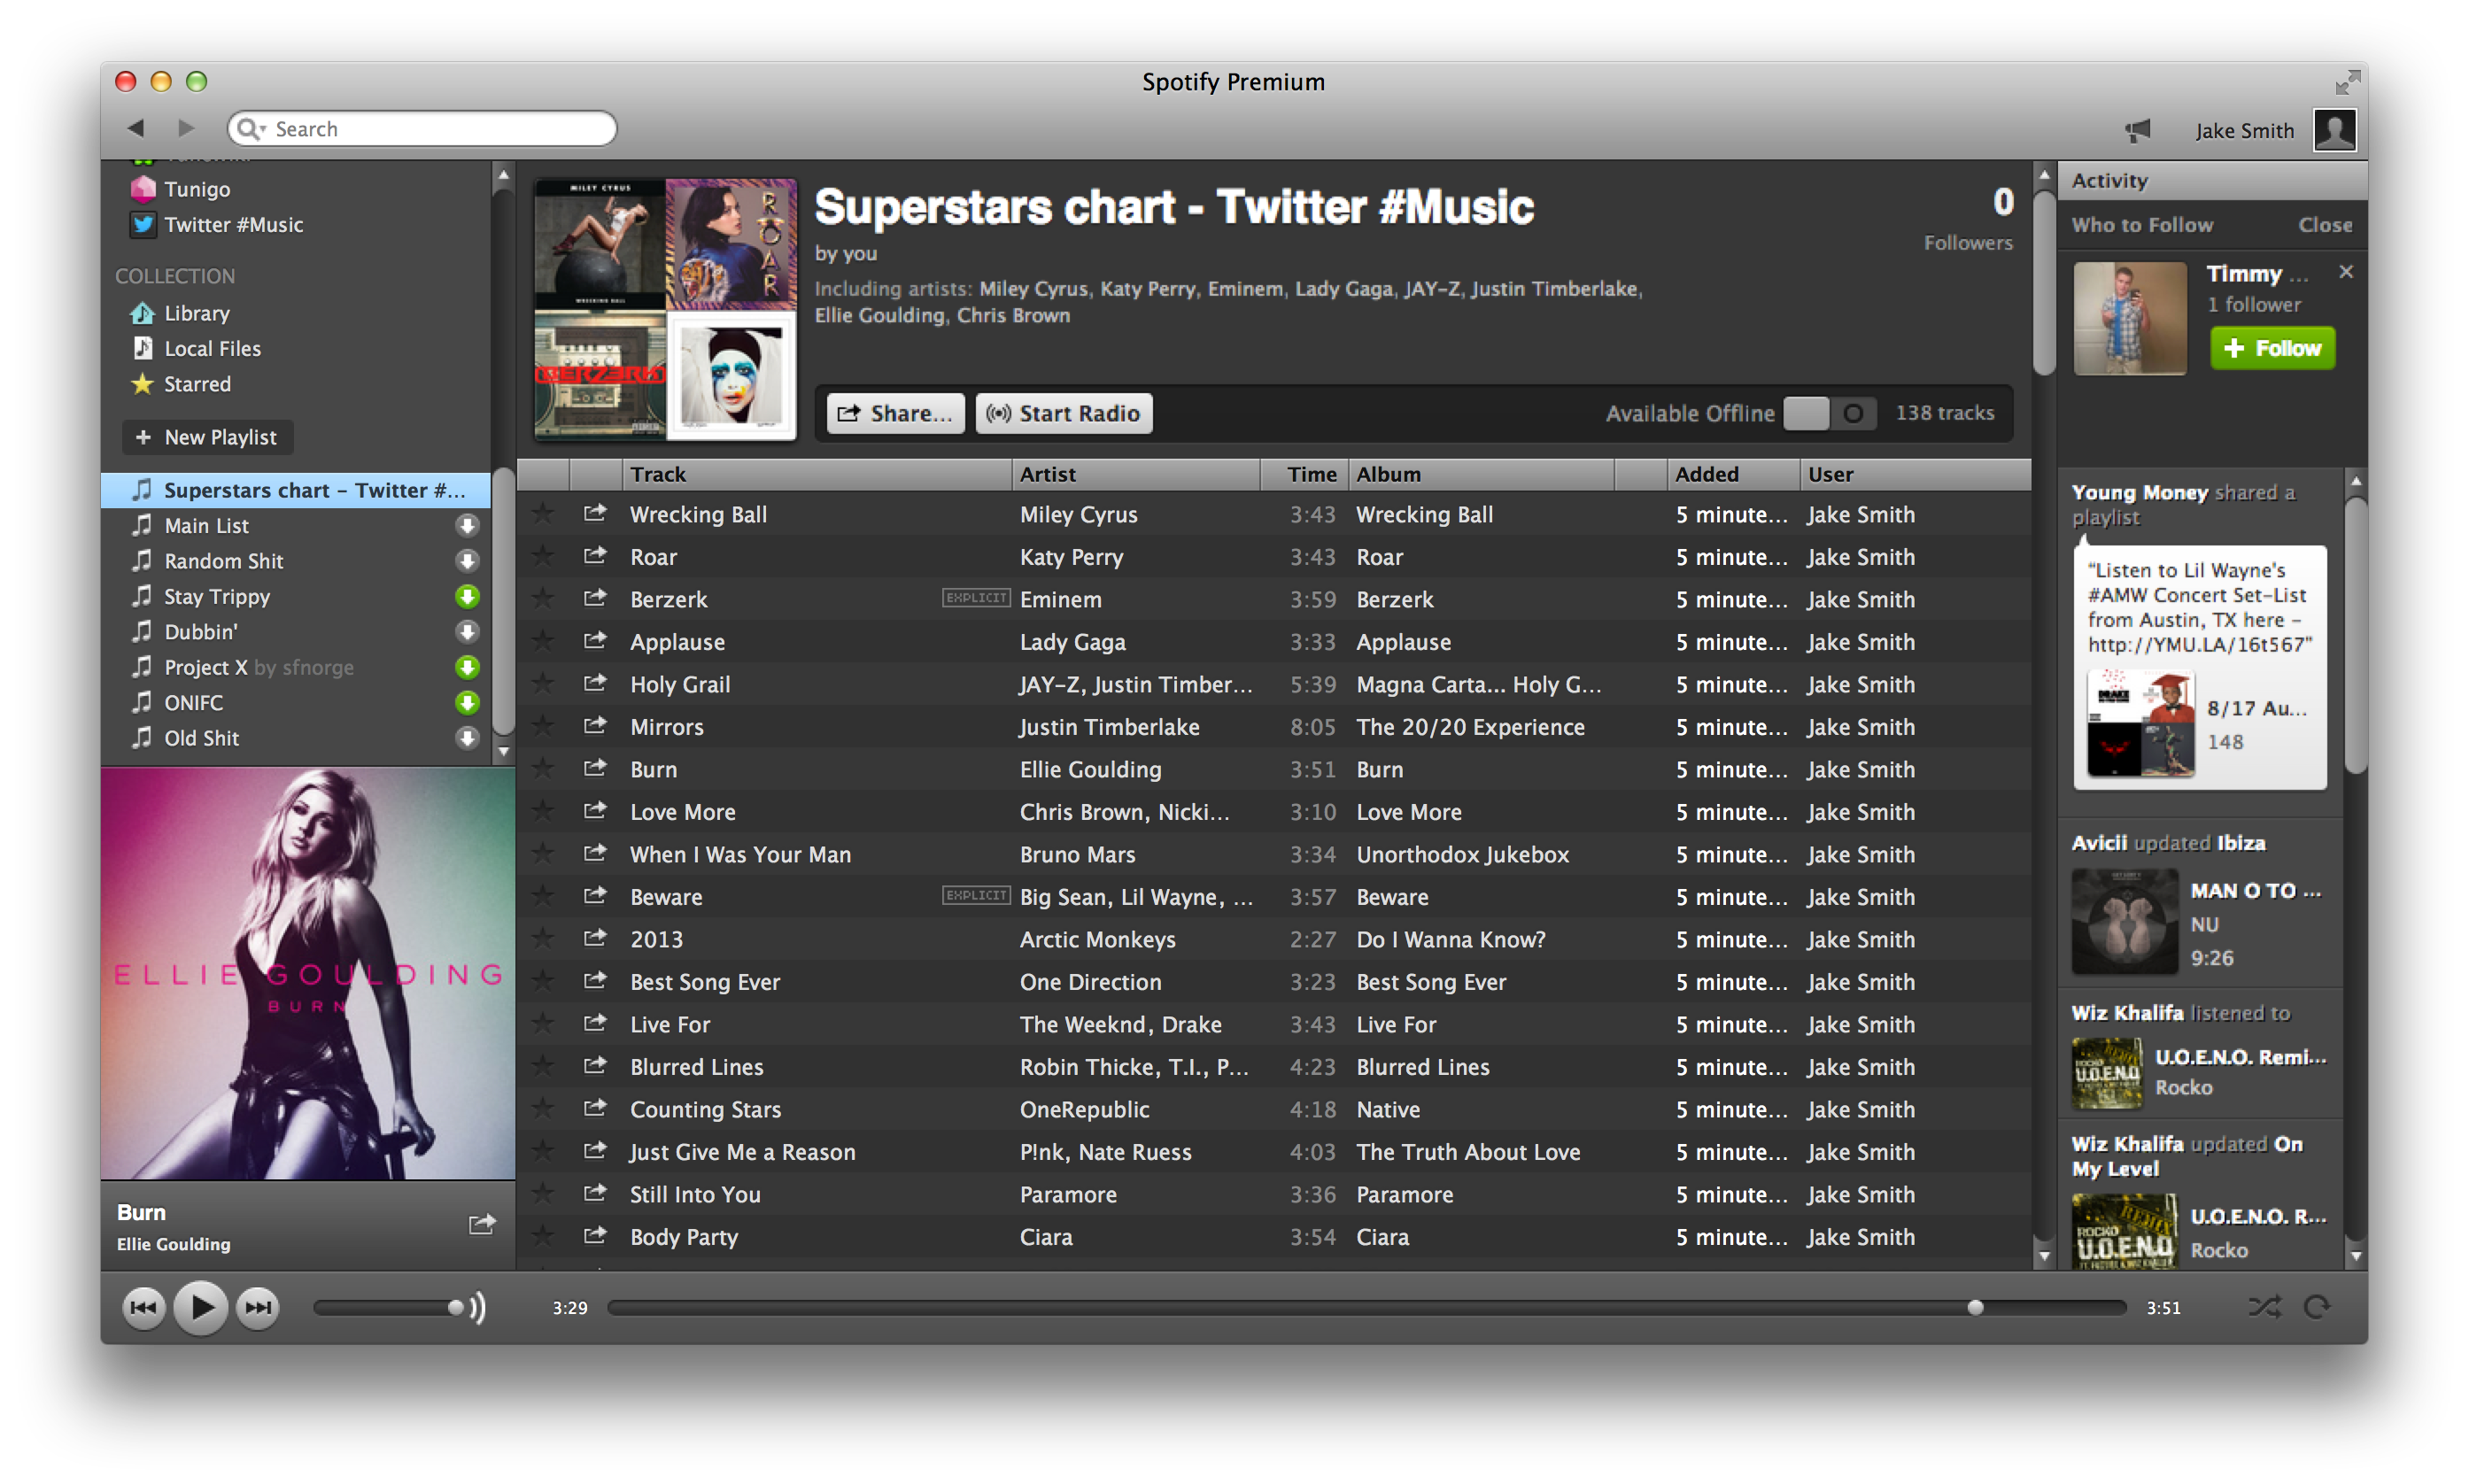 twitter music becomes more useful thanks to spotify app image 2